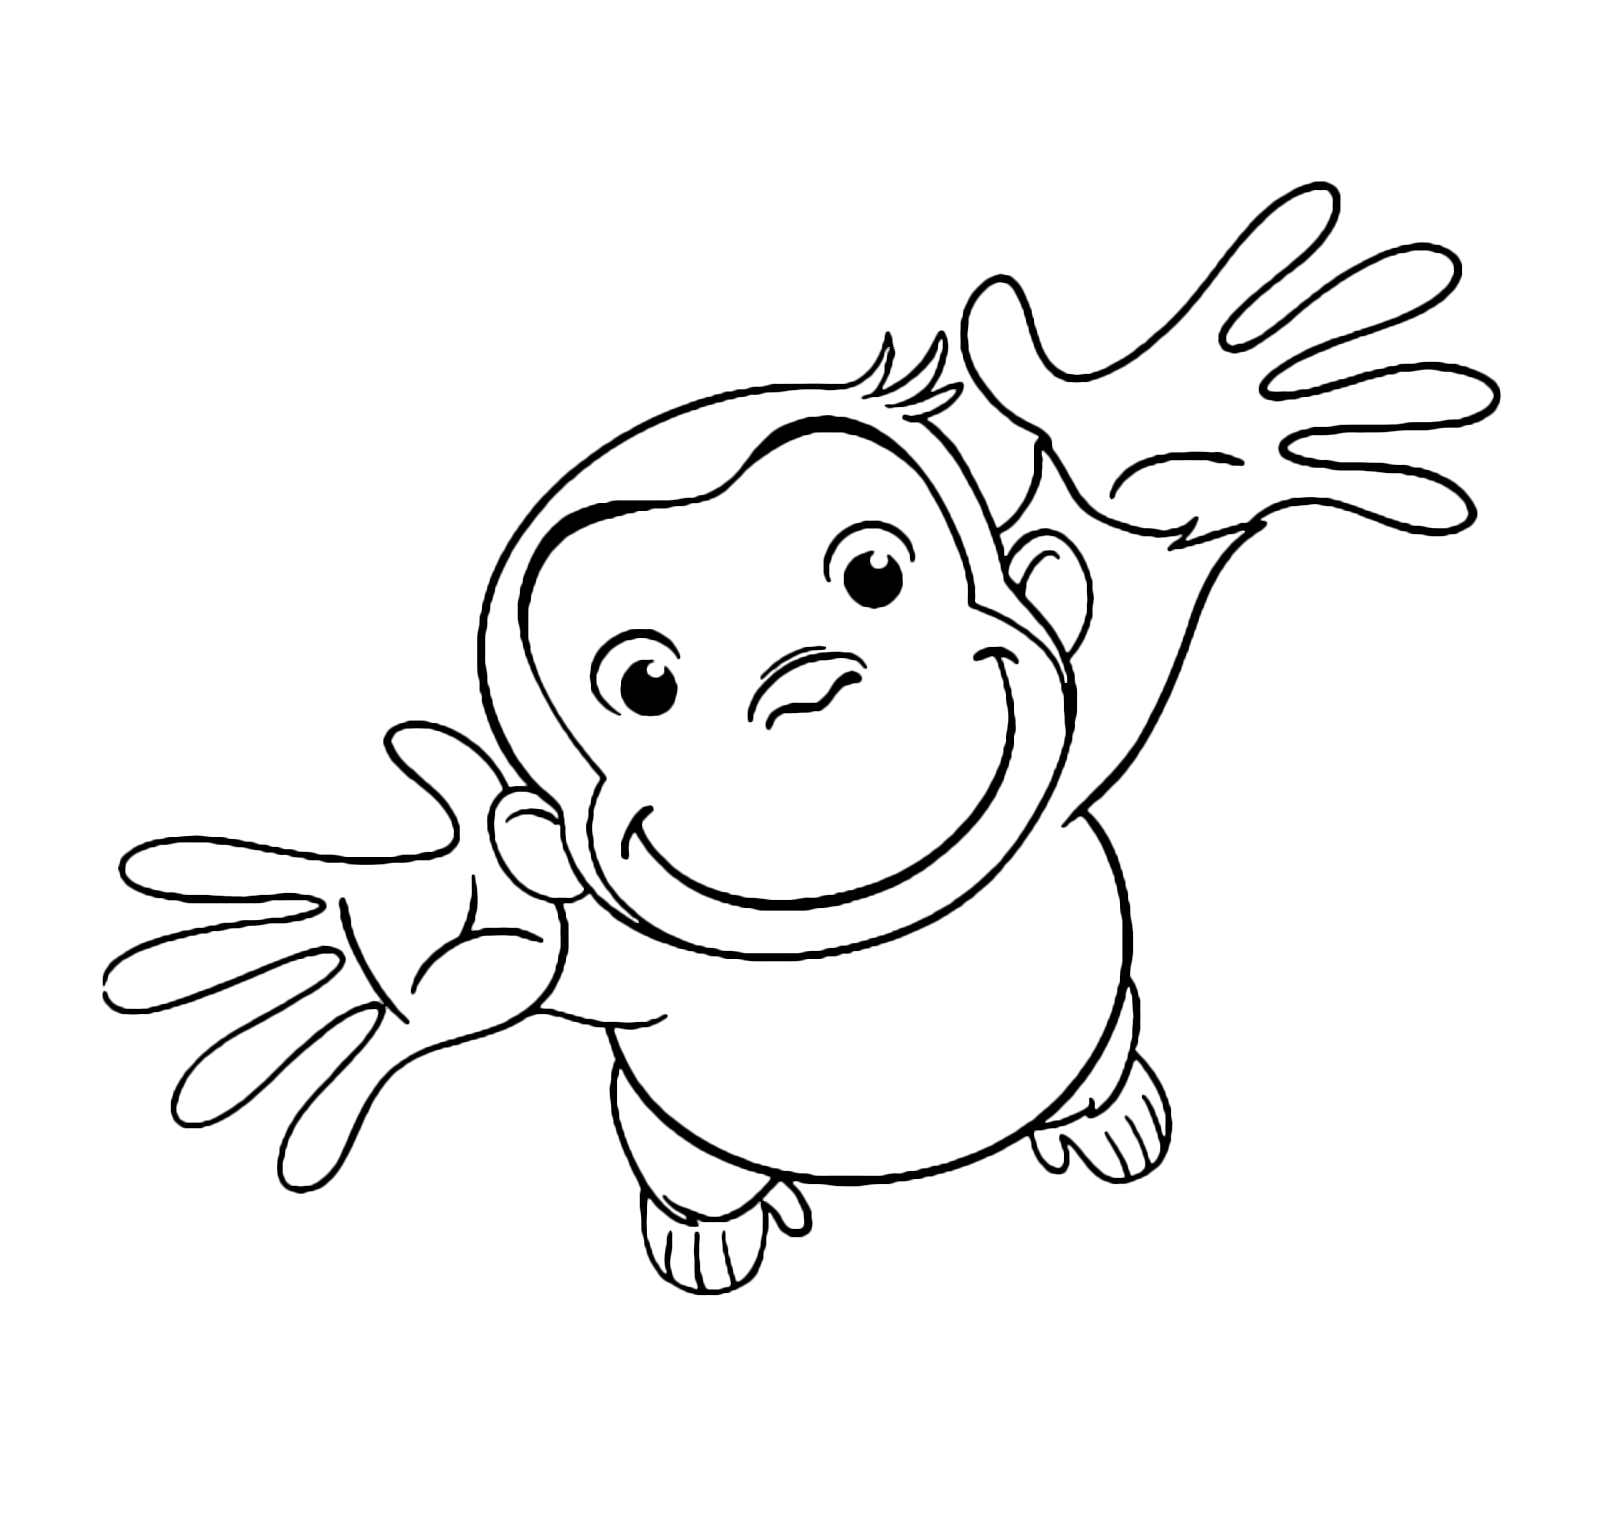 Curious George - George raises his hands to the sky